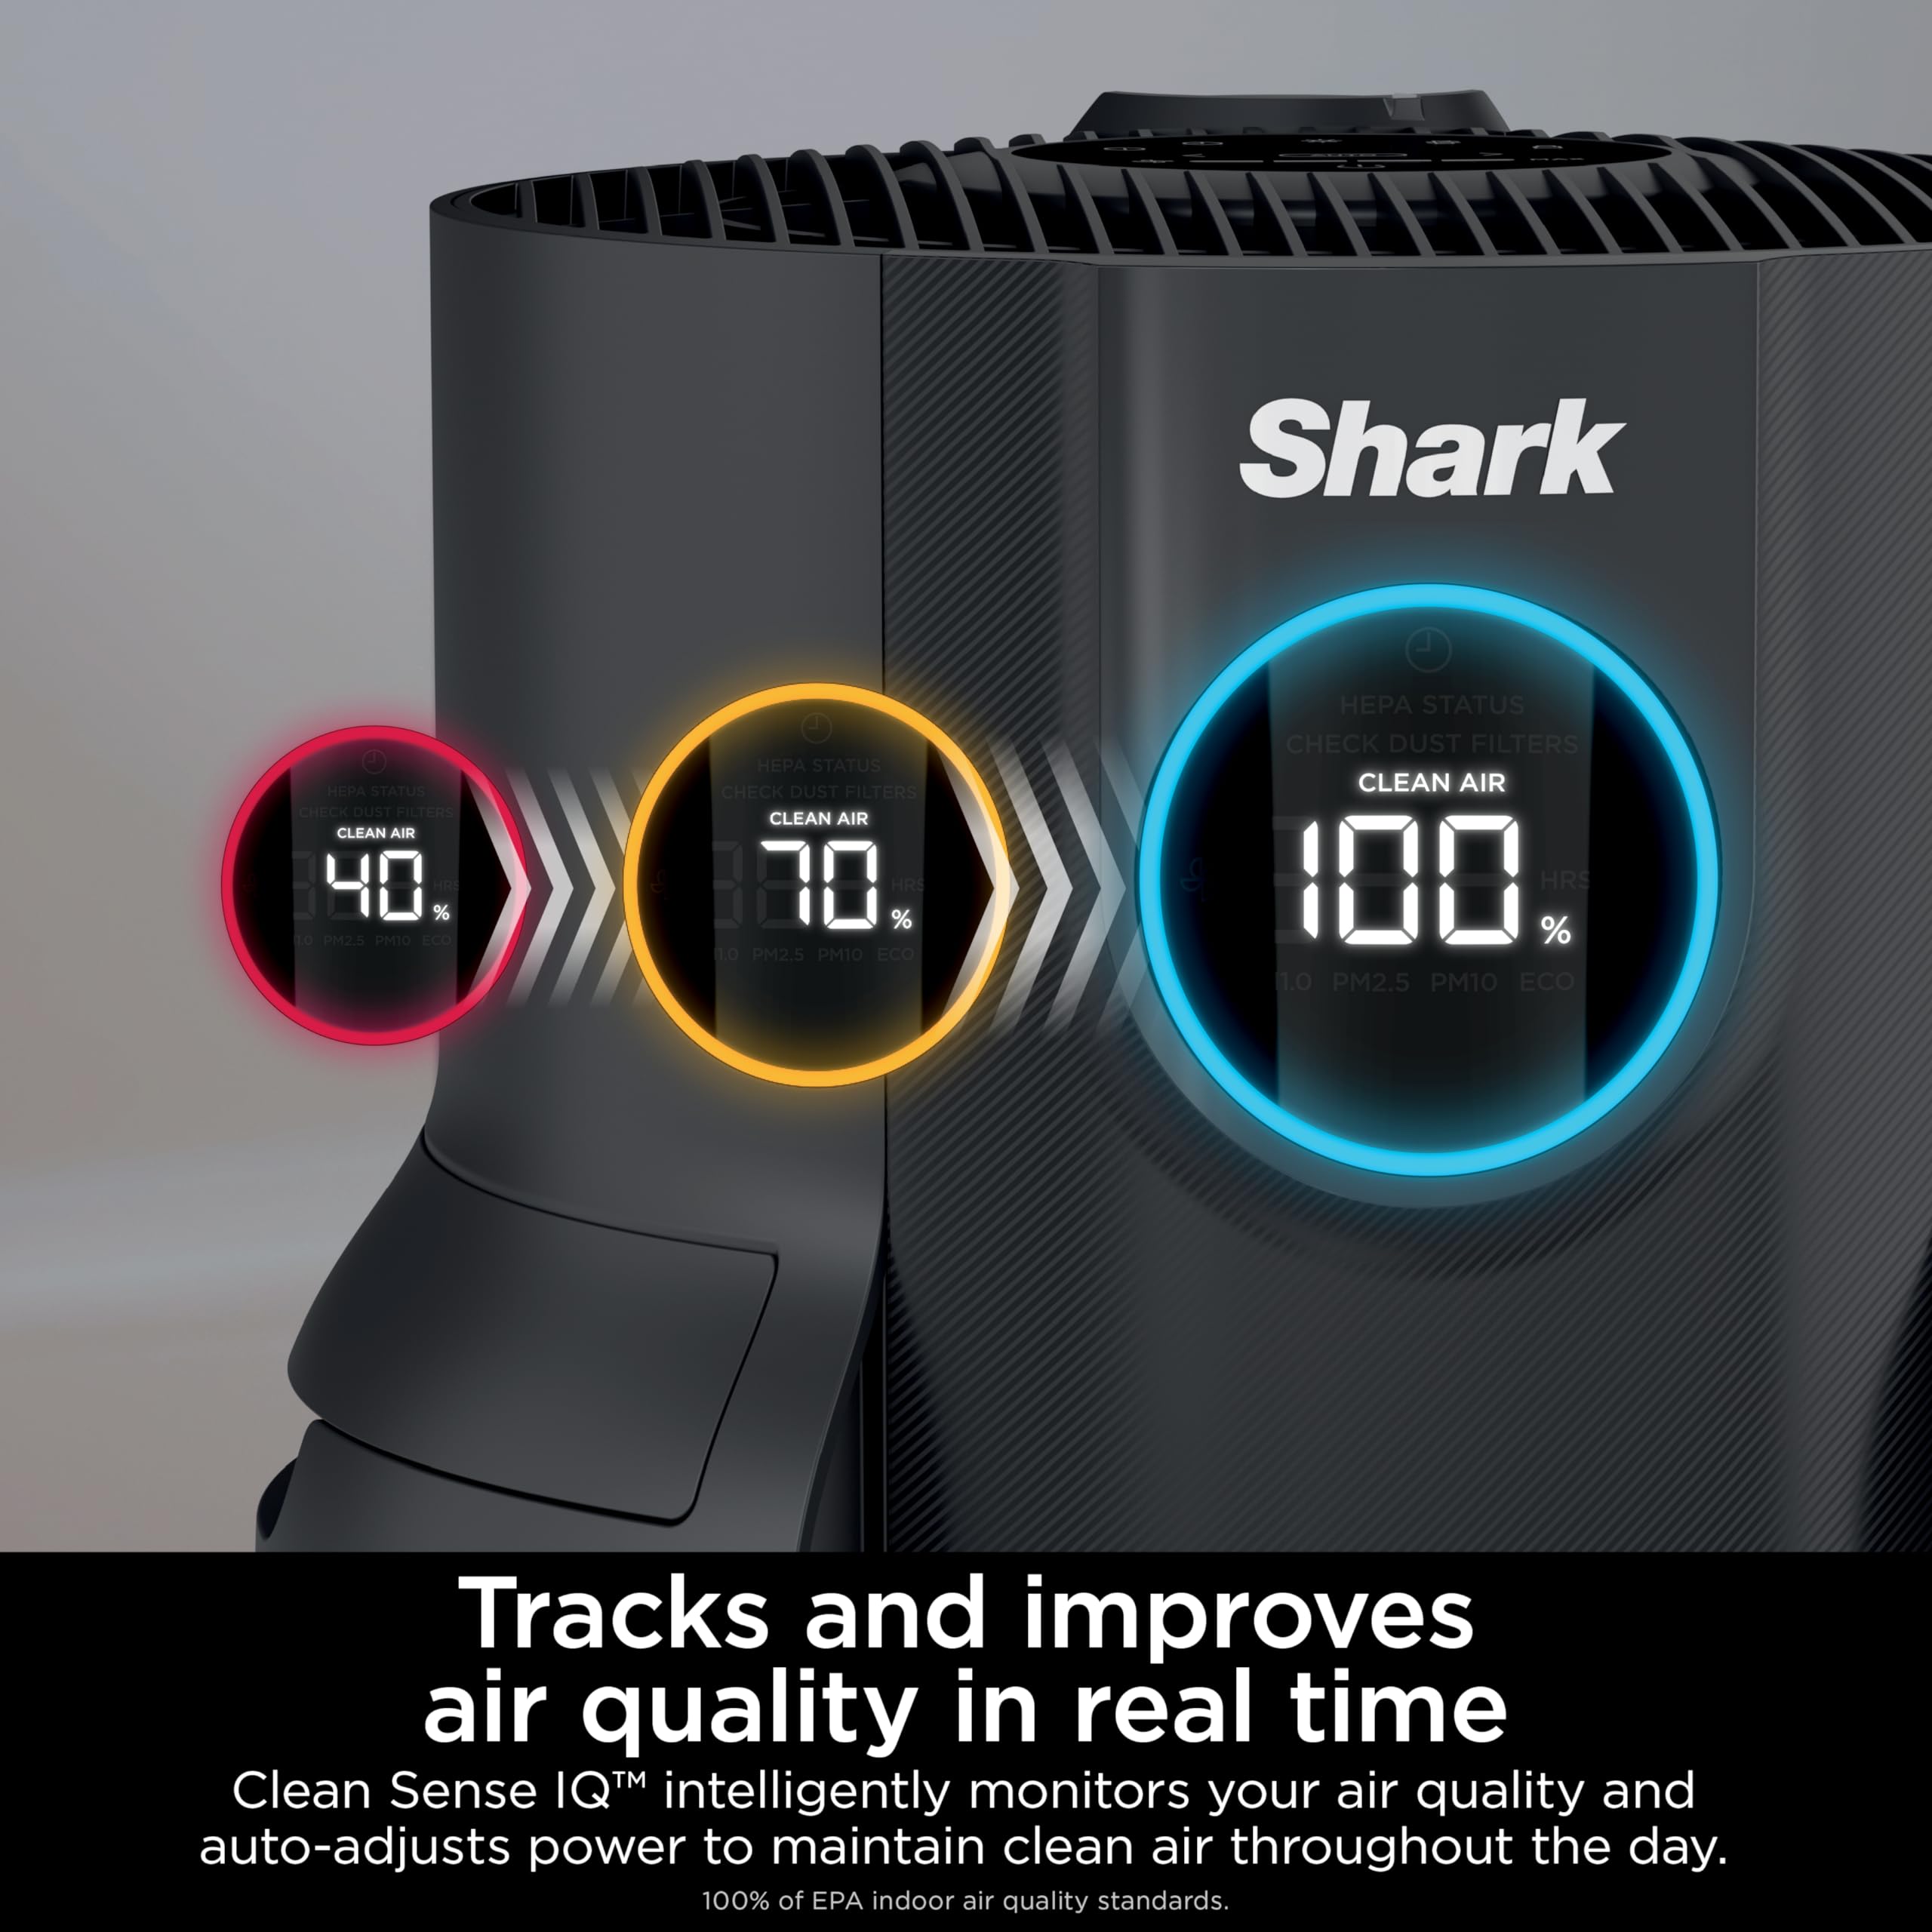 Shark HP152 NeverChange Air Purifier, 5-year filter, save $300+ in filter replacements, Large Room, 650sq. ft., Odor Neutralizer Technology, captures 99.98% of particles, dust, smells, Charcoal Grey